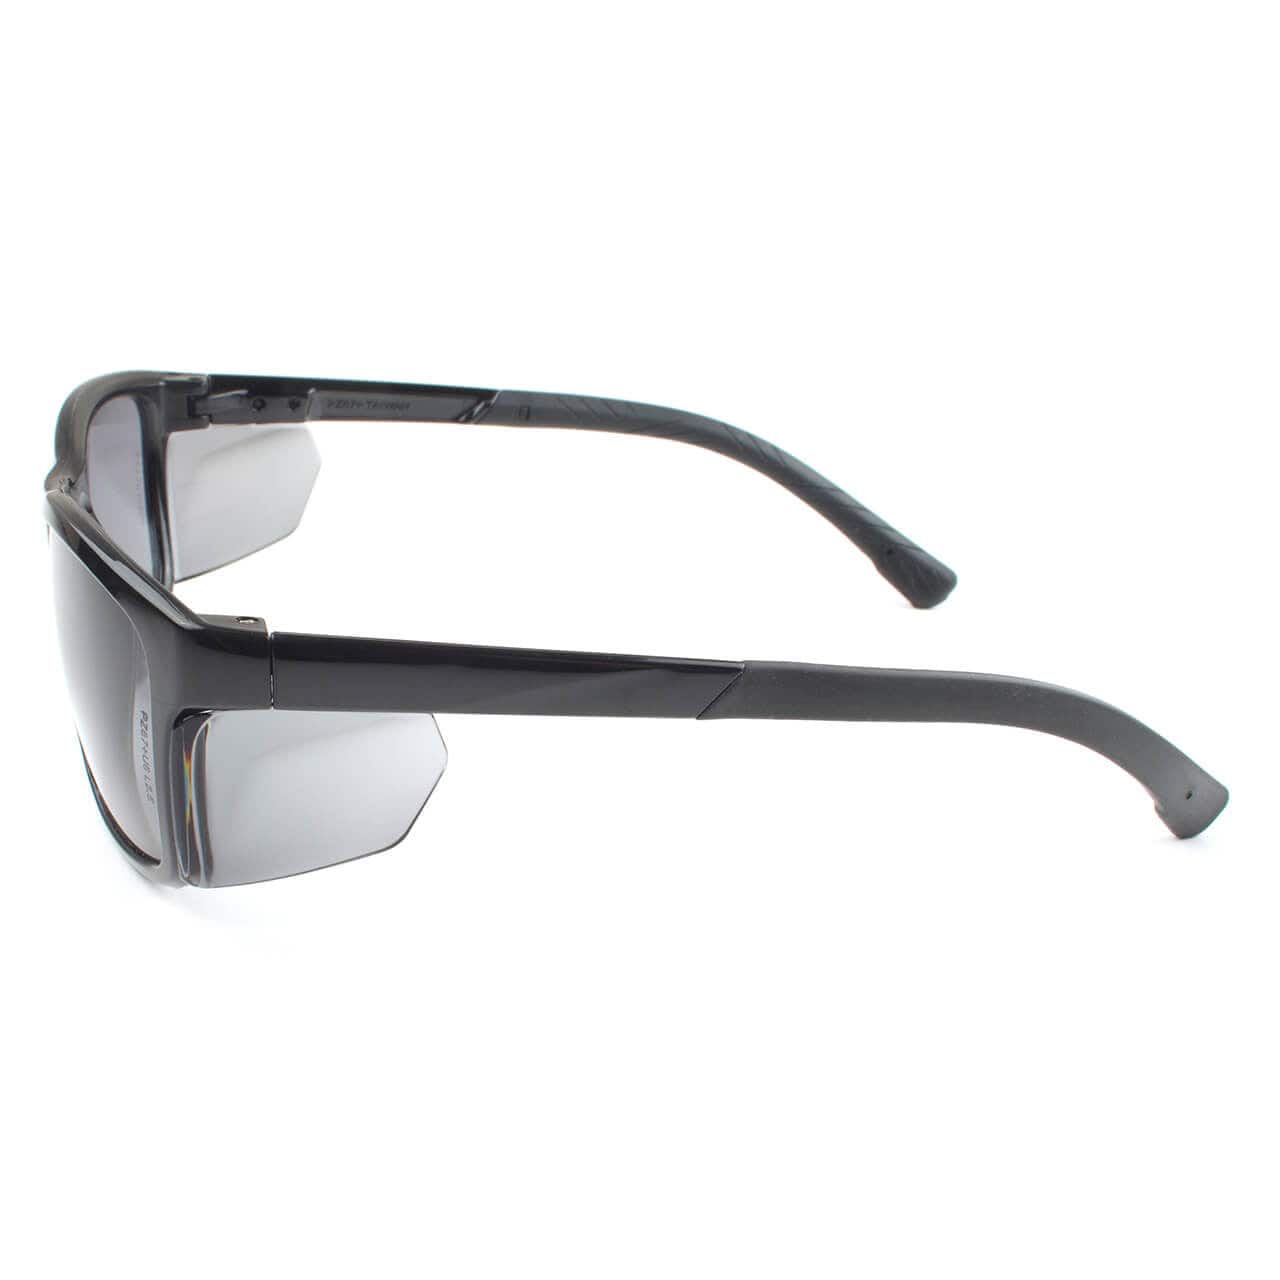 Metel M40 Safety Glasses with Black Frame and Gray Lenses Side View